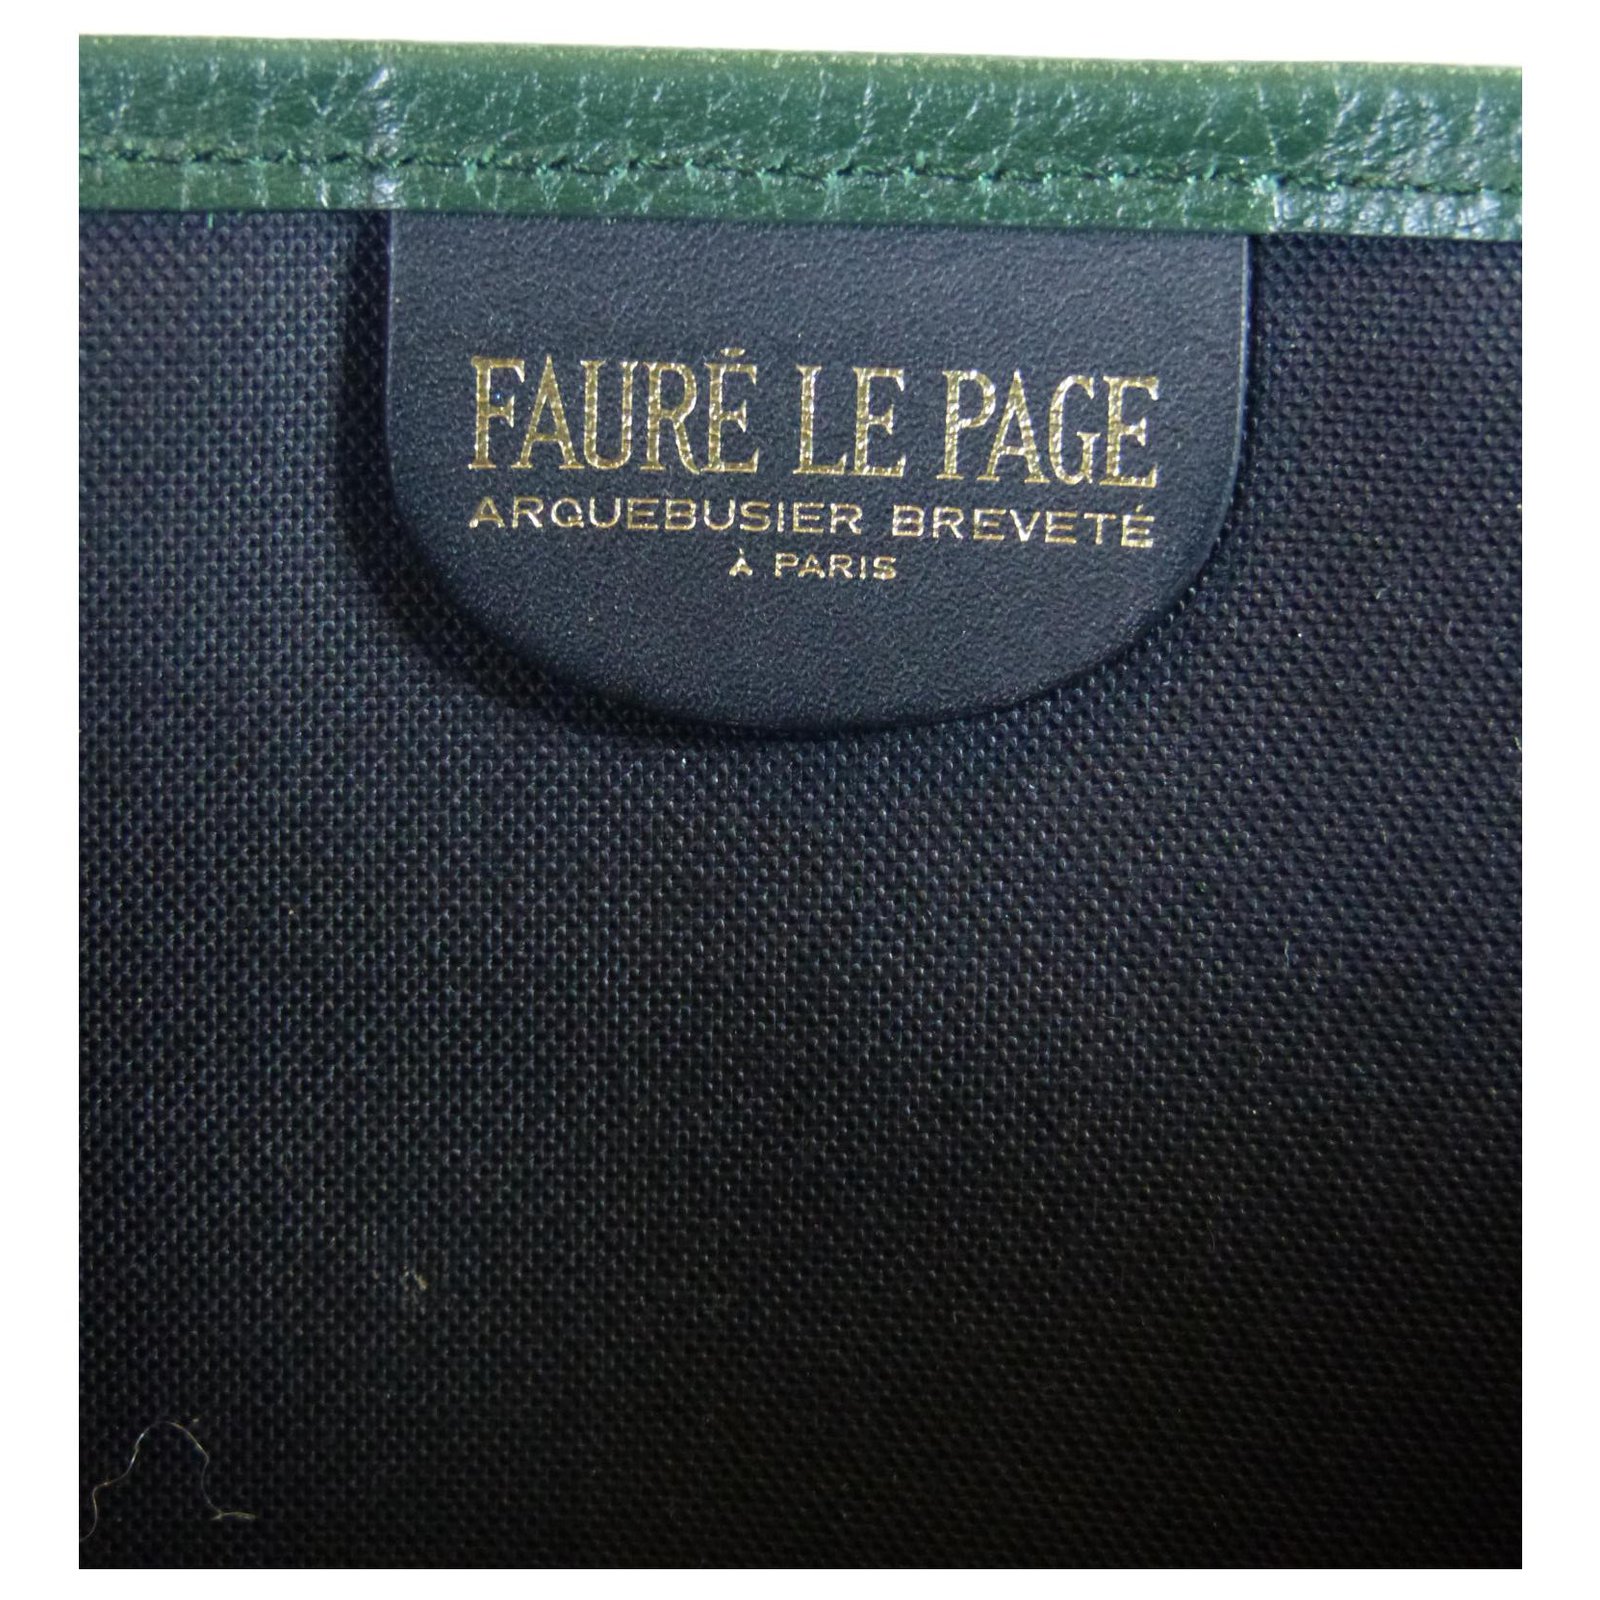 Sell Faure le Page Daily Battle 37 - Green/Yellow